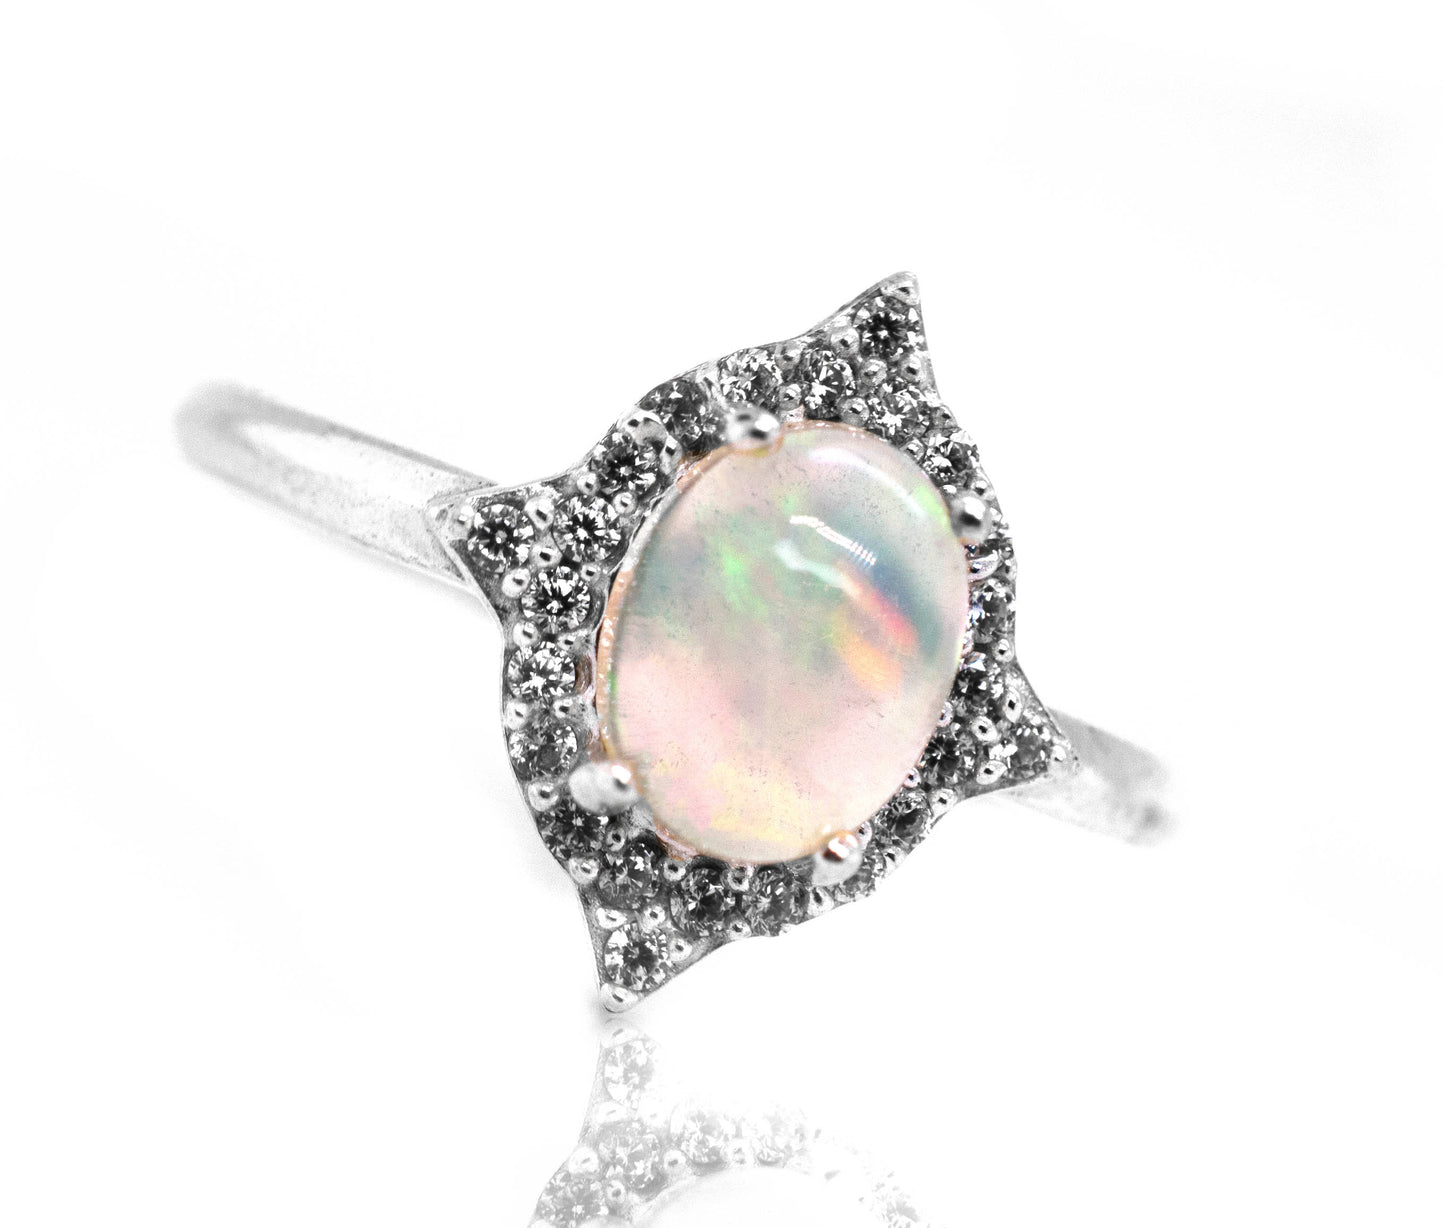 An Elegant Ethiopian Opal Ring With Cubic Zirconia Stones on a white background.